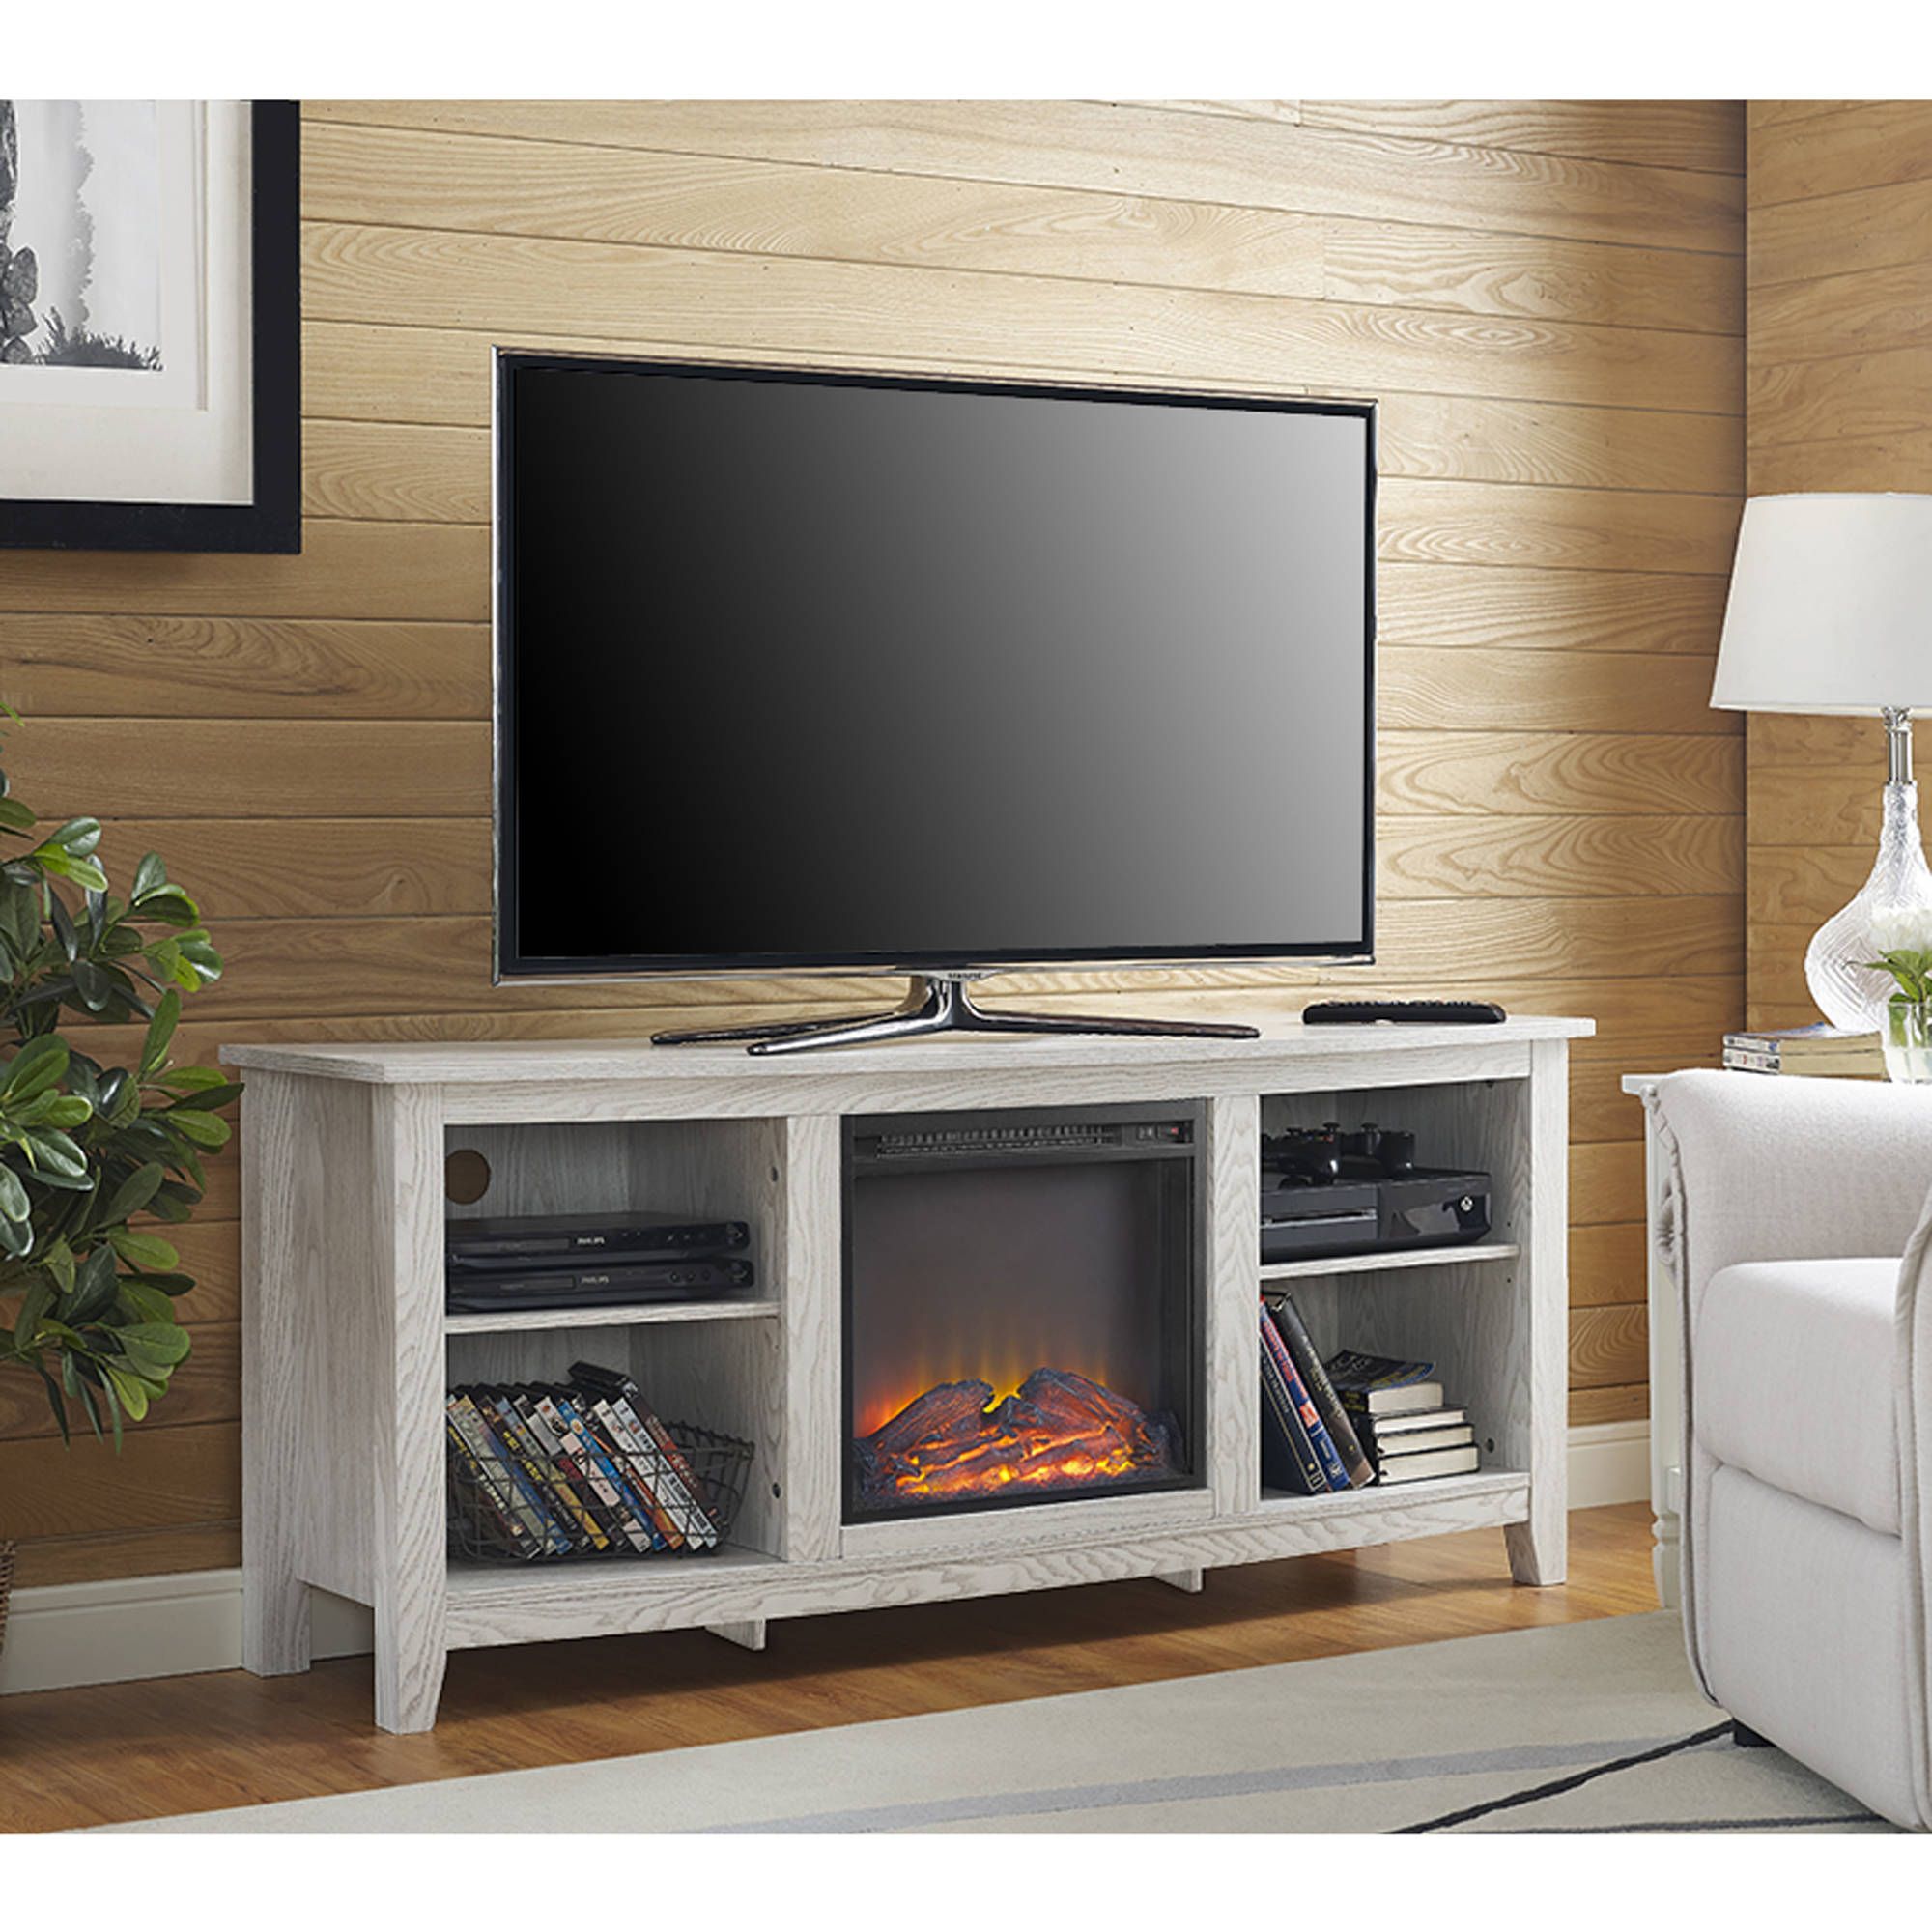 Whitewash Wood Fireplace Tv Stand For Tvs Up To 60" | Ebay Pertaining To White Wood Tv Cabinets (View 6 of 15)